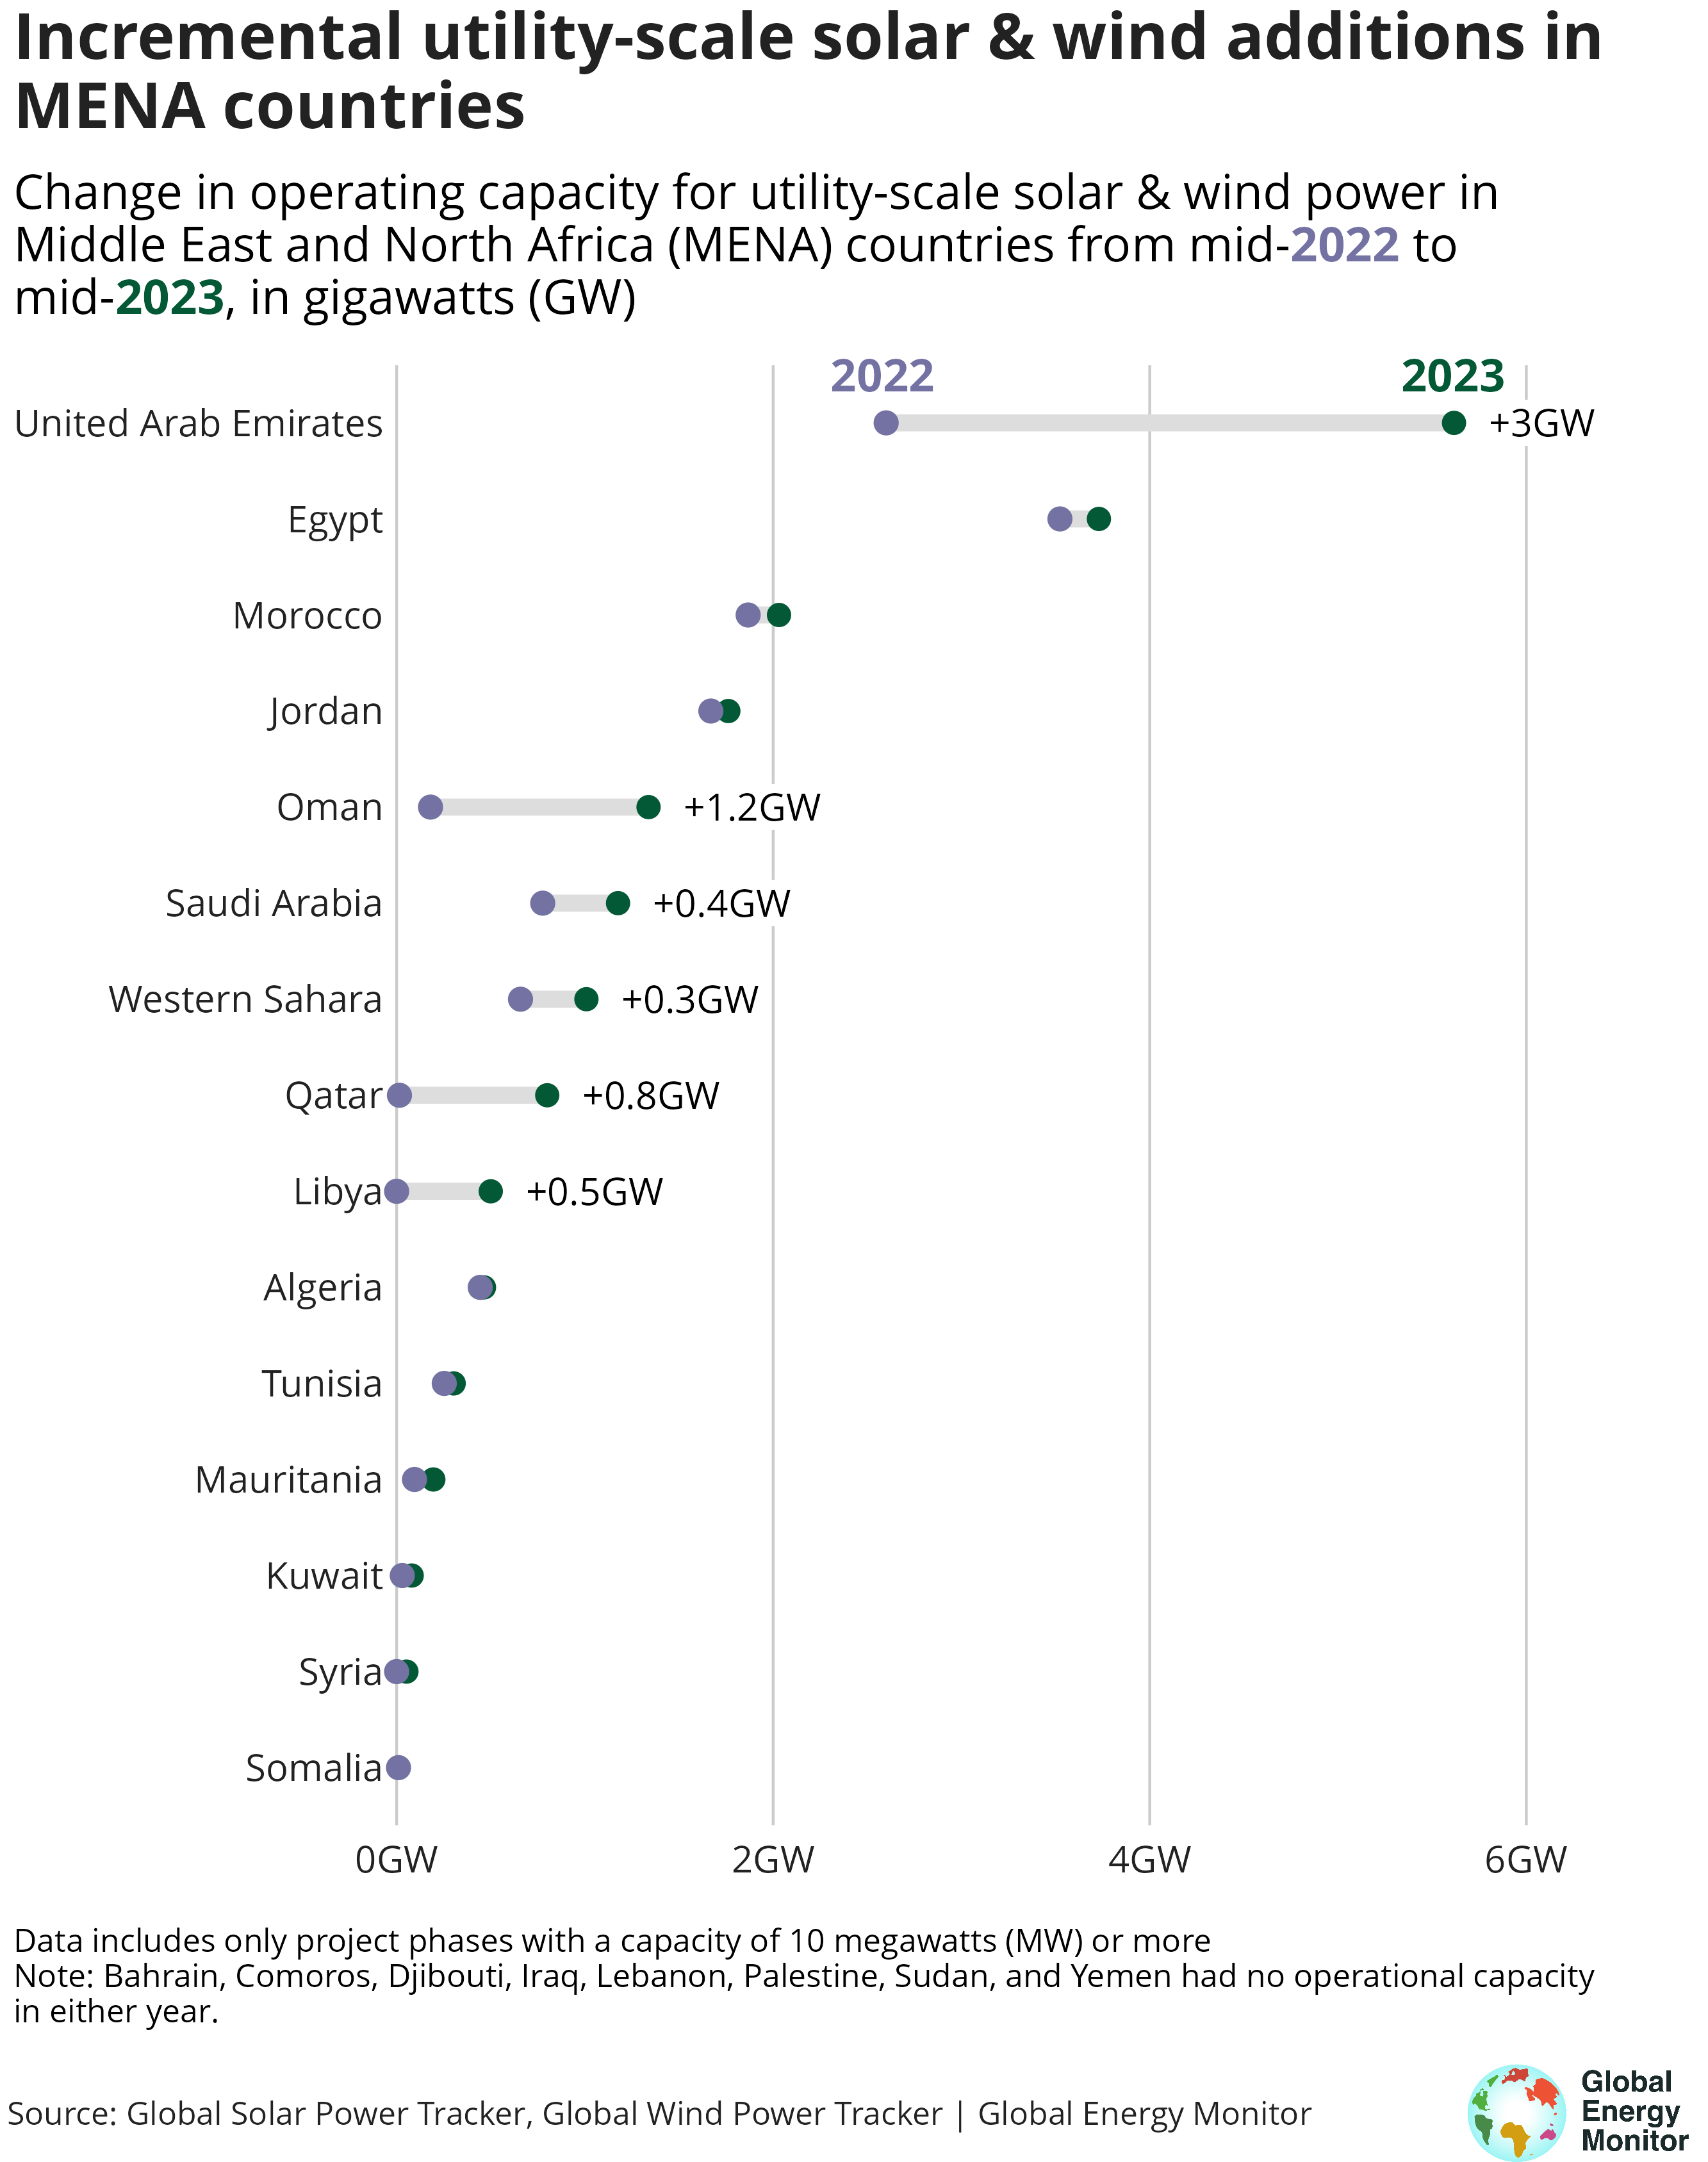 A dumbbell chart showing the incremental solar and wind additions in MENA countries from 2022 to 2023, with the United Arab Emirates adding the most in the past twelve months with 3 gigawatts, Oman second with 1.2 and Qatar next with 0.8 - but no country in the region currently has more than 6 gigawatts total operational capacity. 